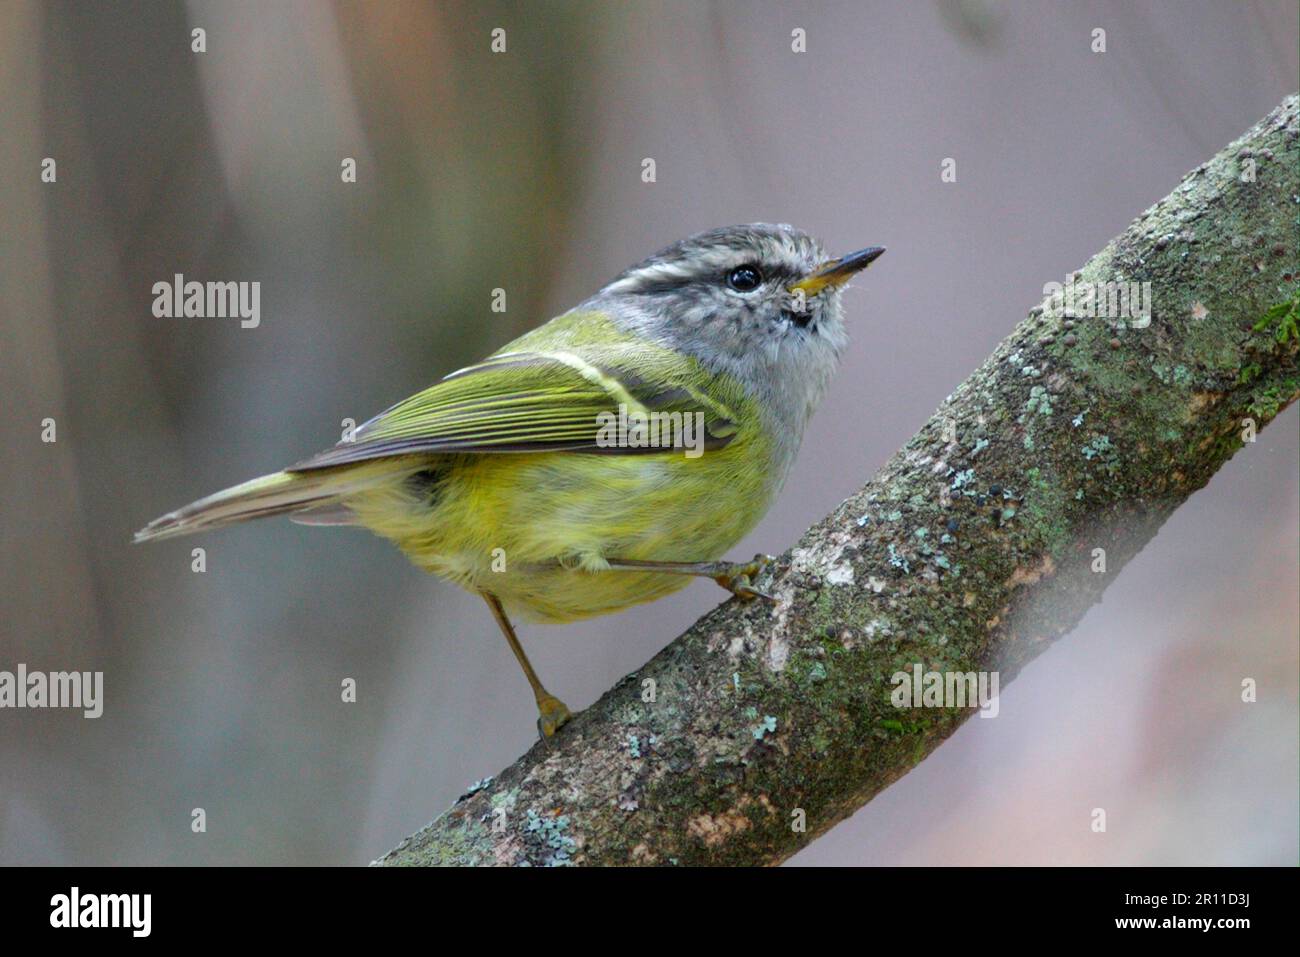 Ashy-throated Warbler (Phylloscopus maculipennis) adult, perched on branch, Zixi Shan, Chuxiong, Yunnan, China Stock Photo